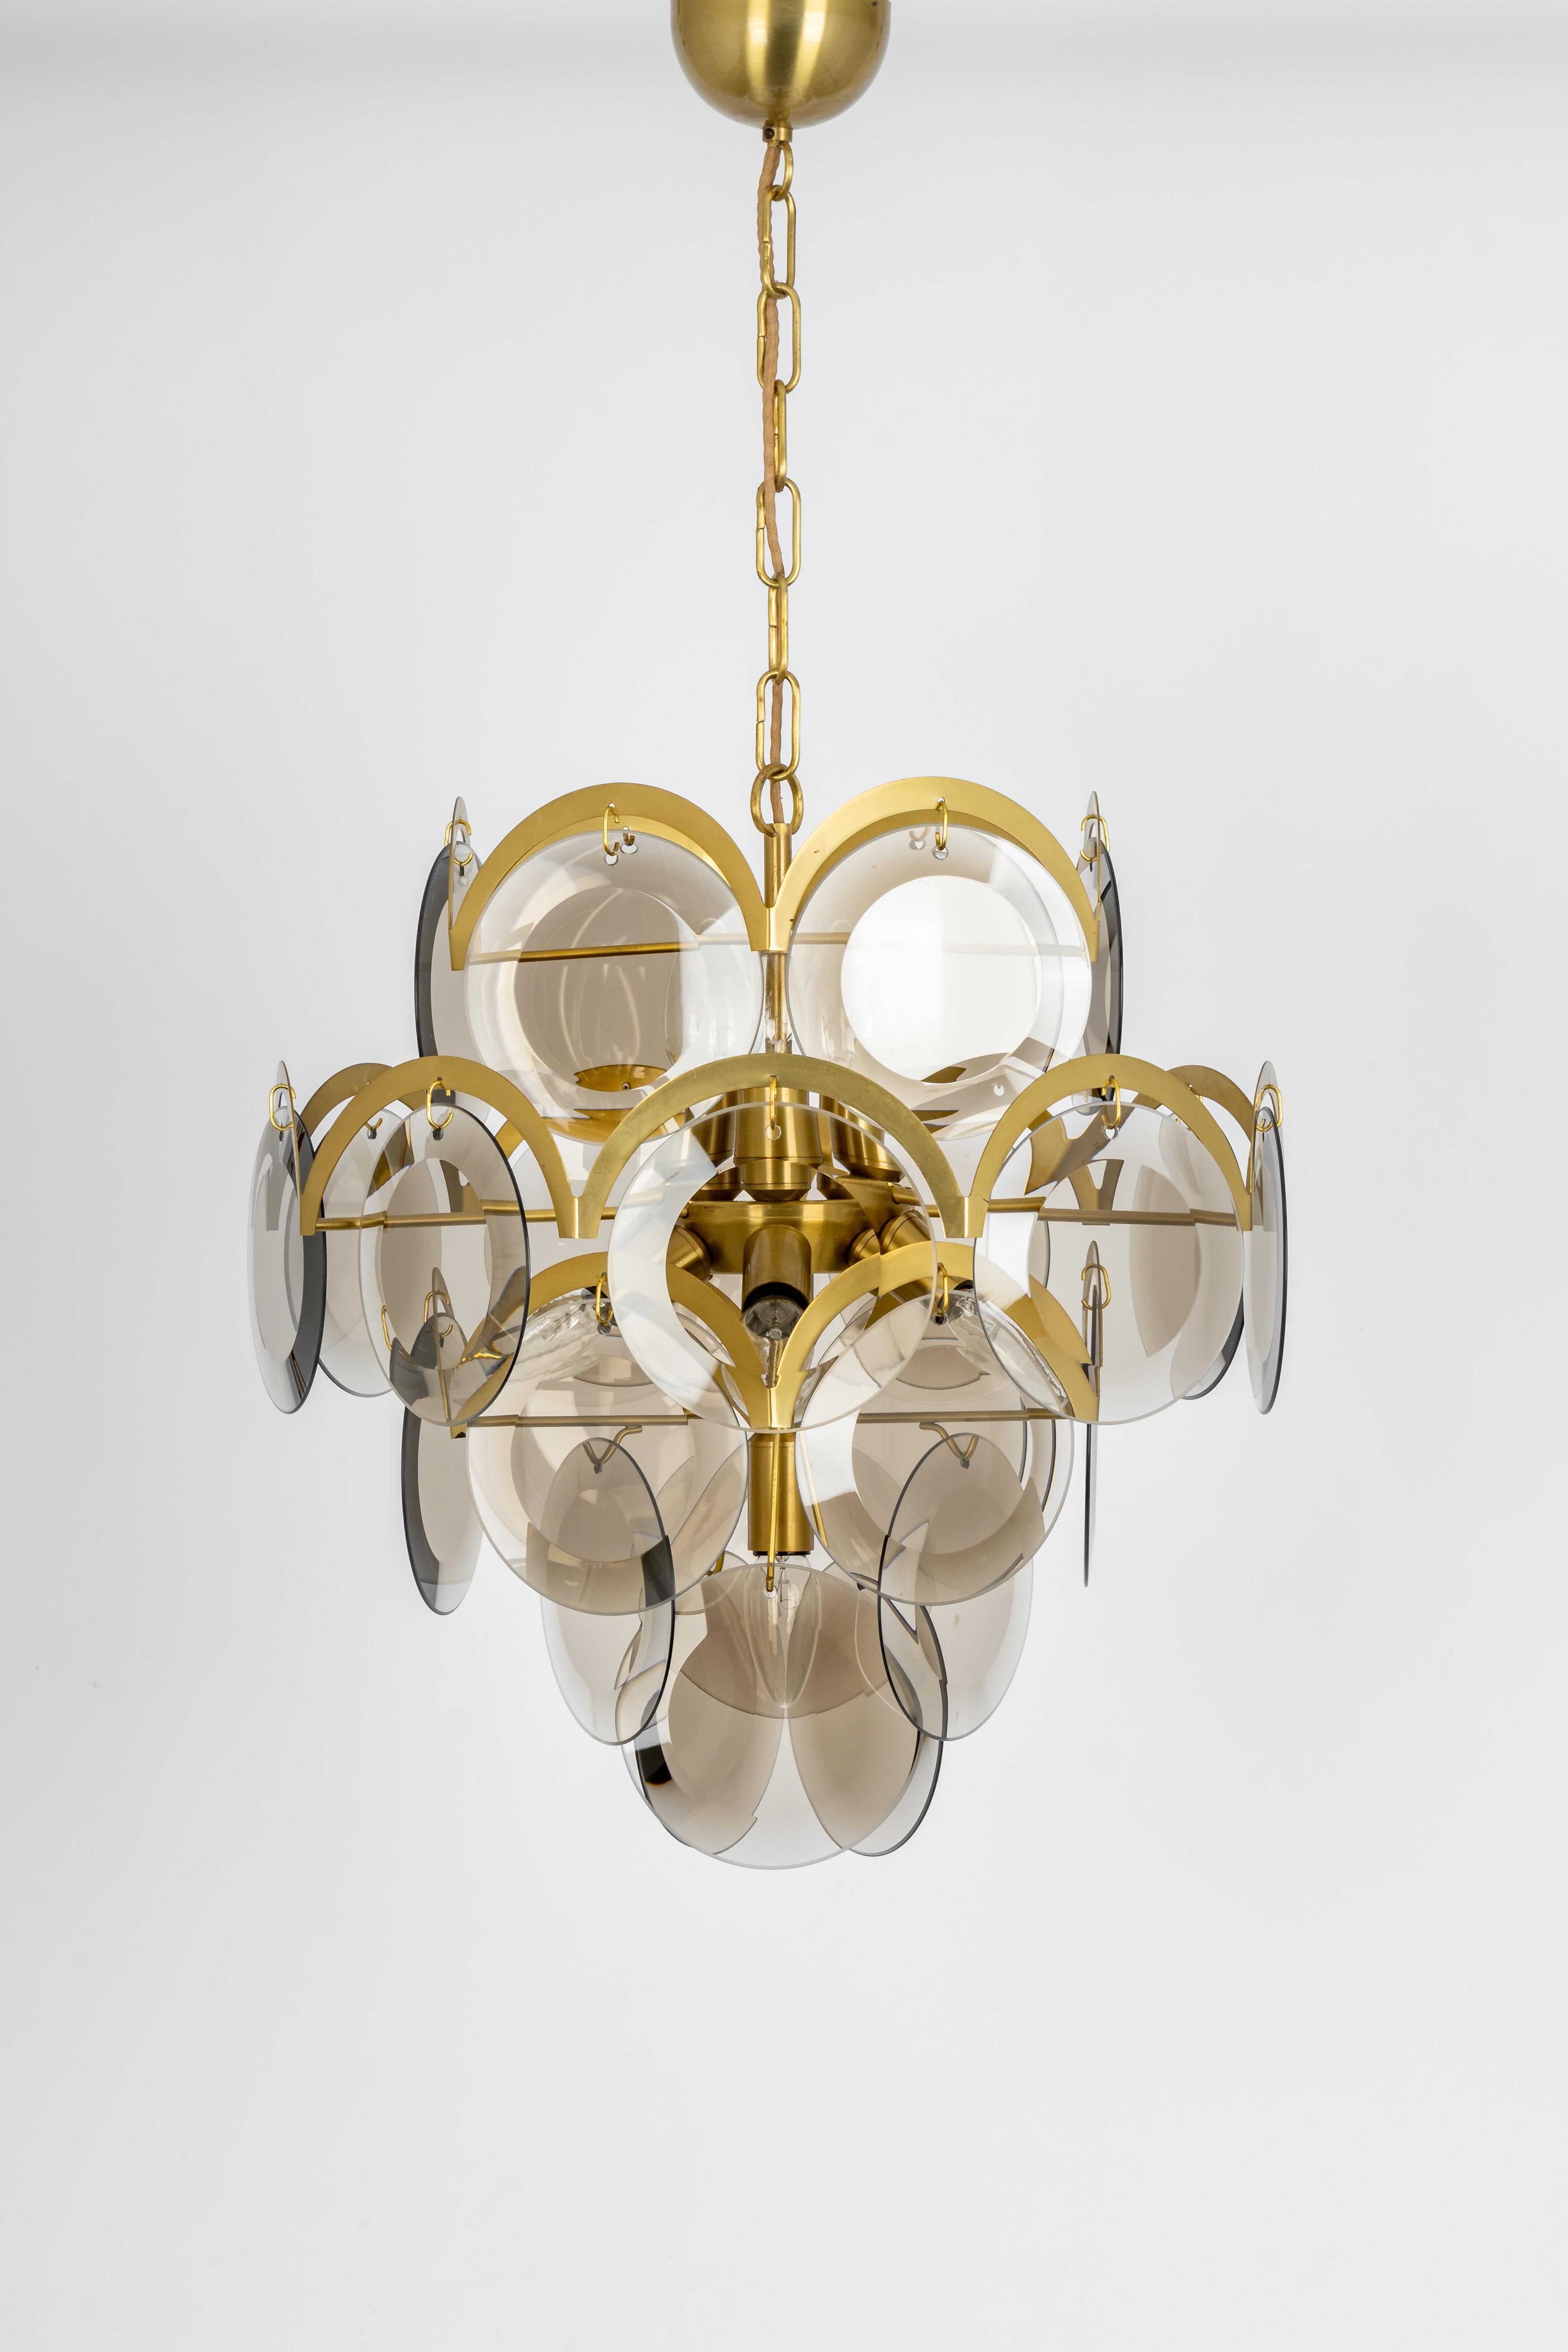 A stunning five-tier chandelier by Vistosi, Italy, manufactured in, circa 1960-1969
High quality and in very good condition. Cleaned, well-wired and ready to use. 
The fixture requires 10 x E14 small bulbs with 40W max each 
Light bulbs are not